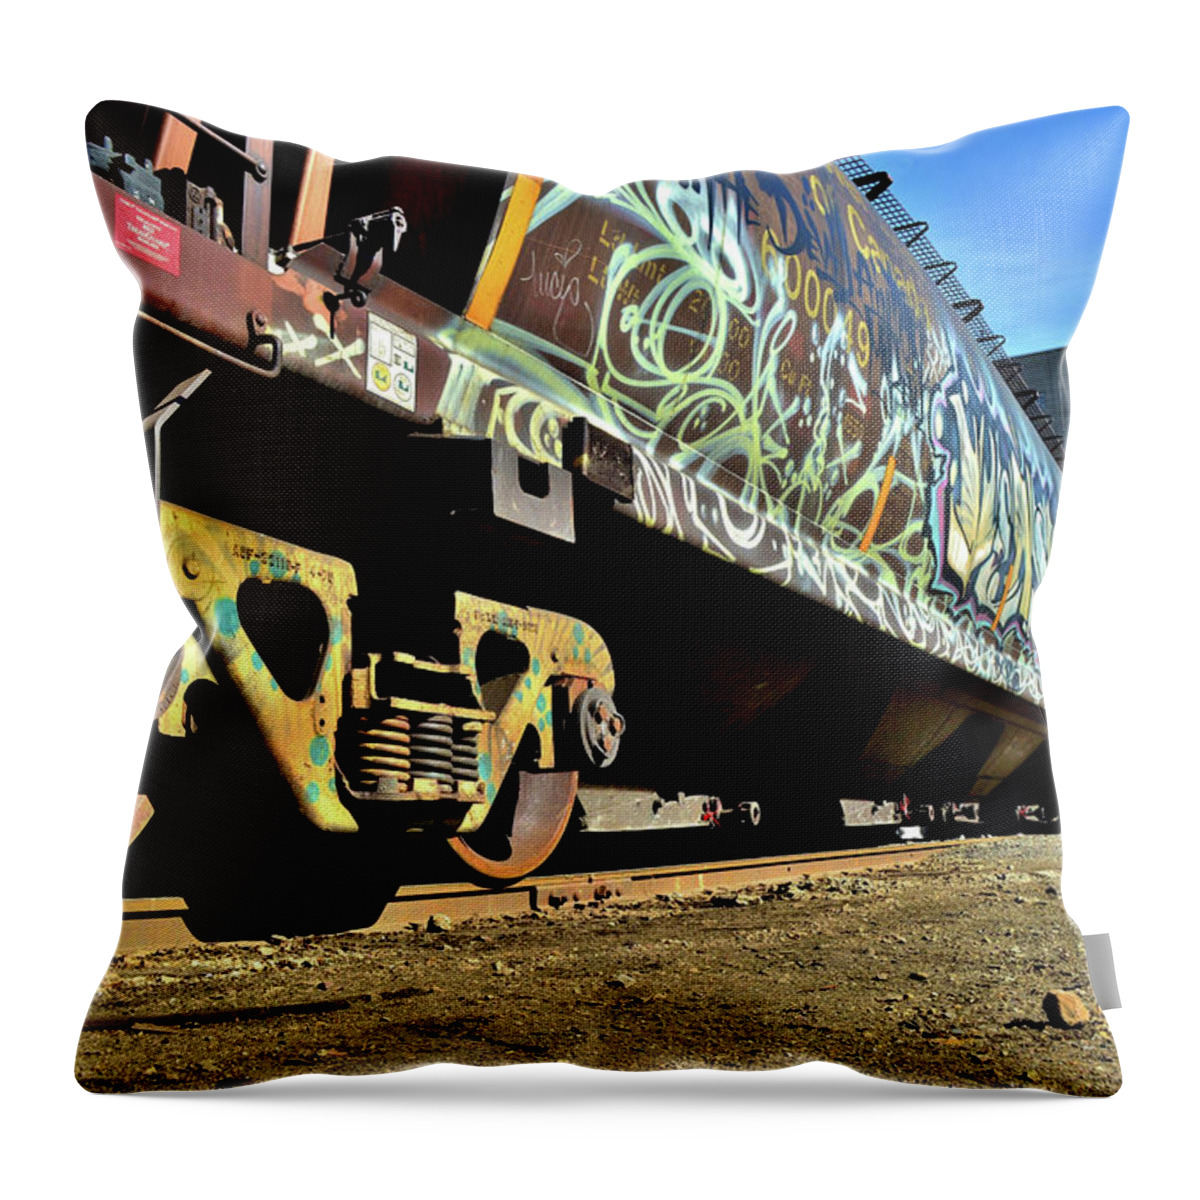 Trains Throw Pillow featuring the photograph Crazy Train by Susie Loechler